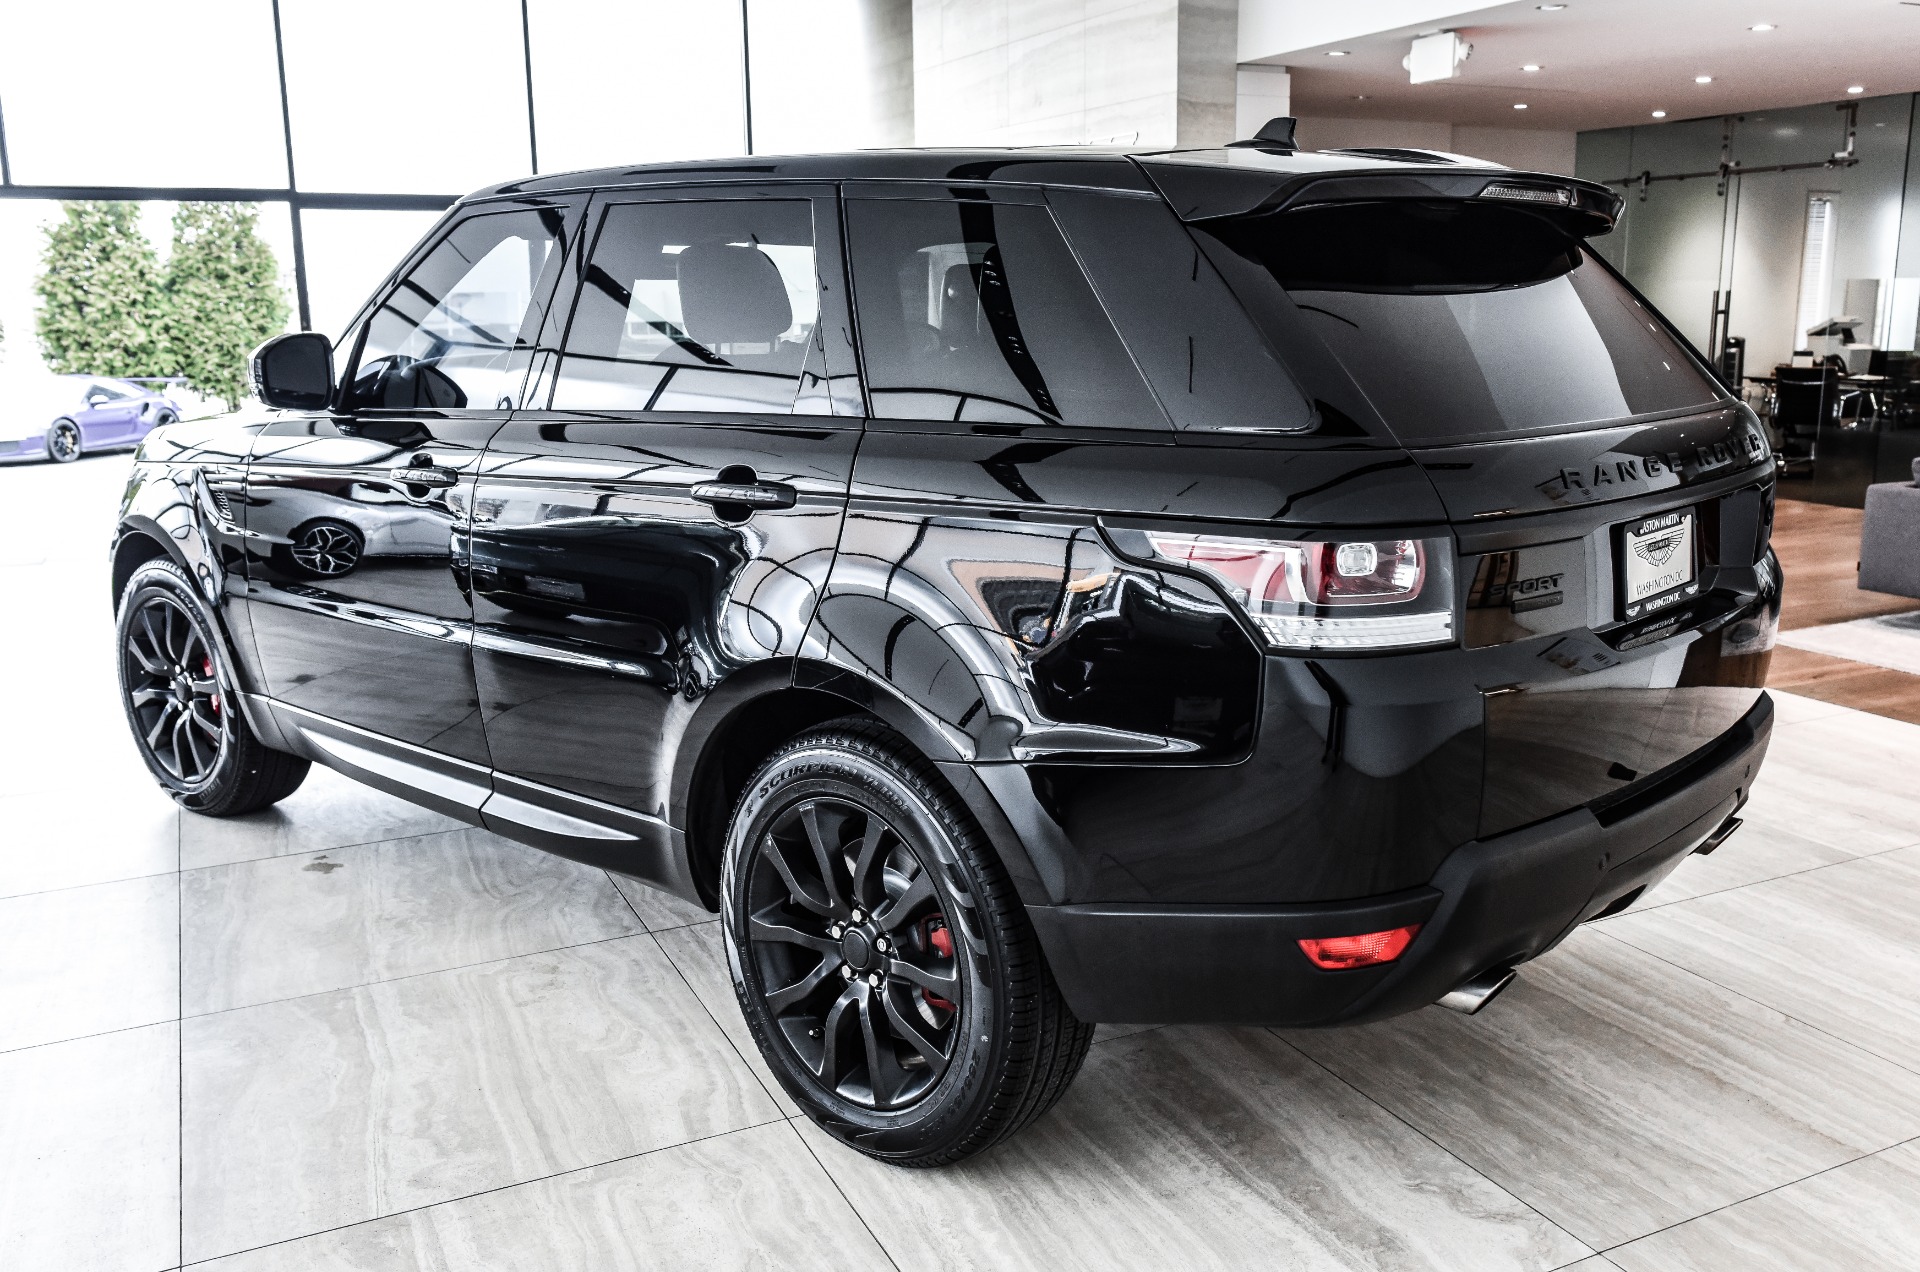 2015 Land Rover Range Rover Sport Supercharged Stock # P533034 for sale ...